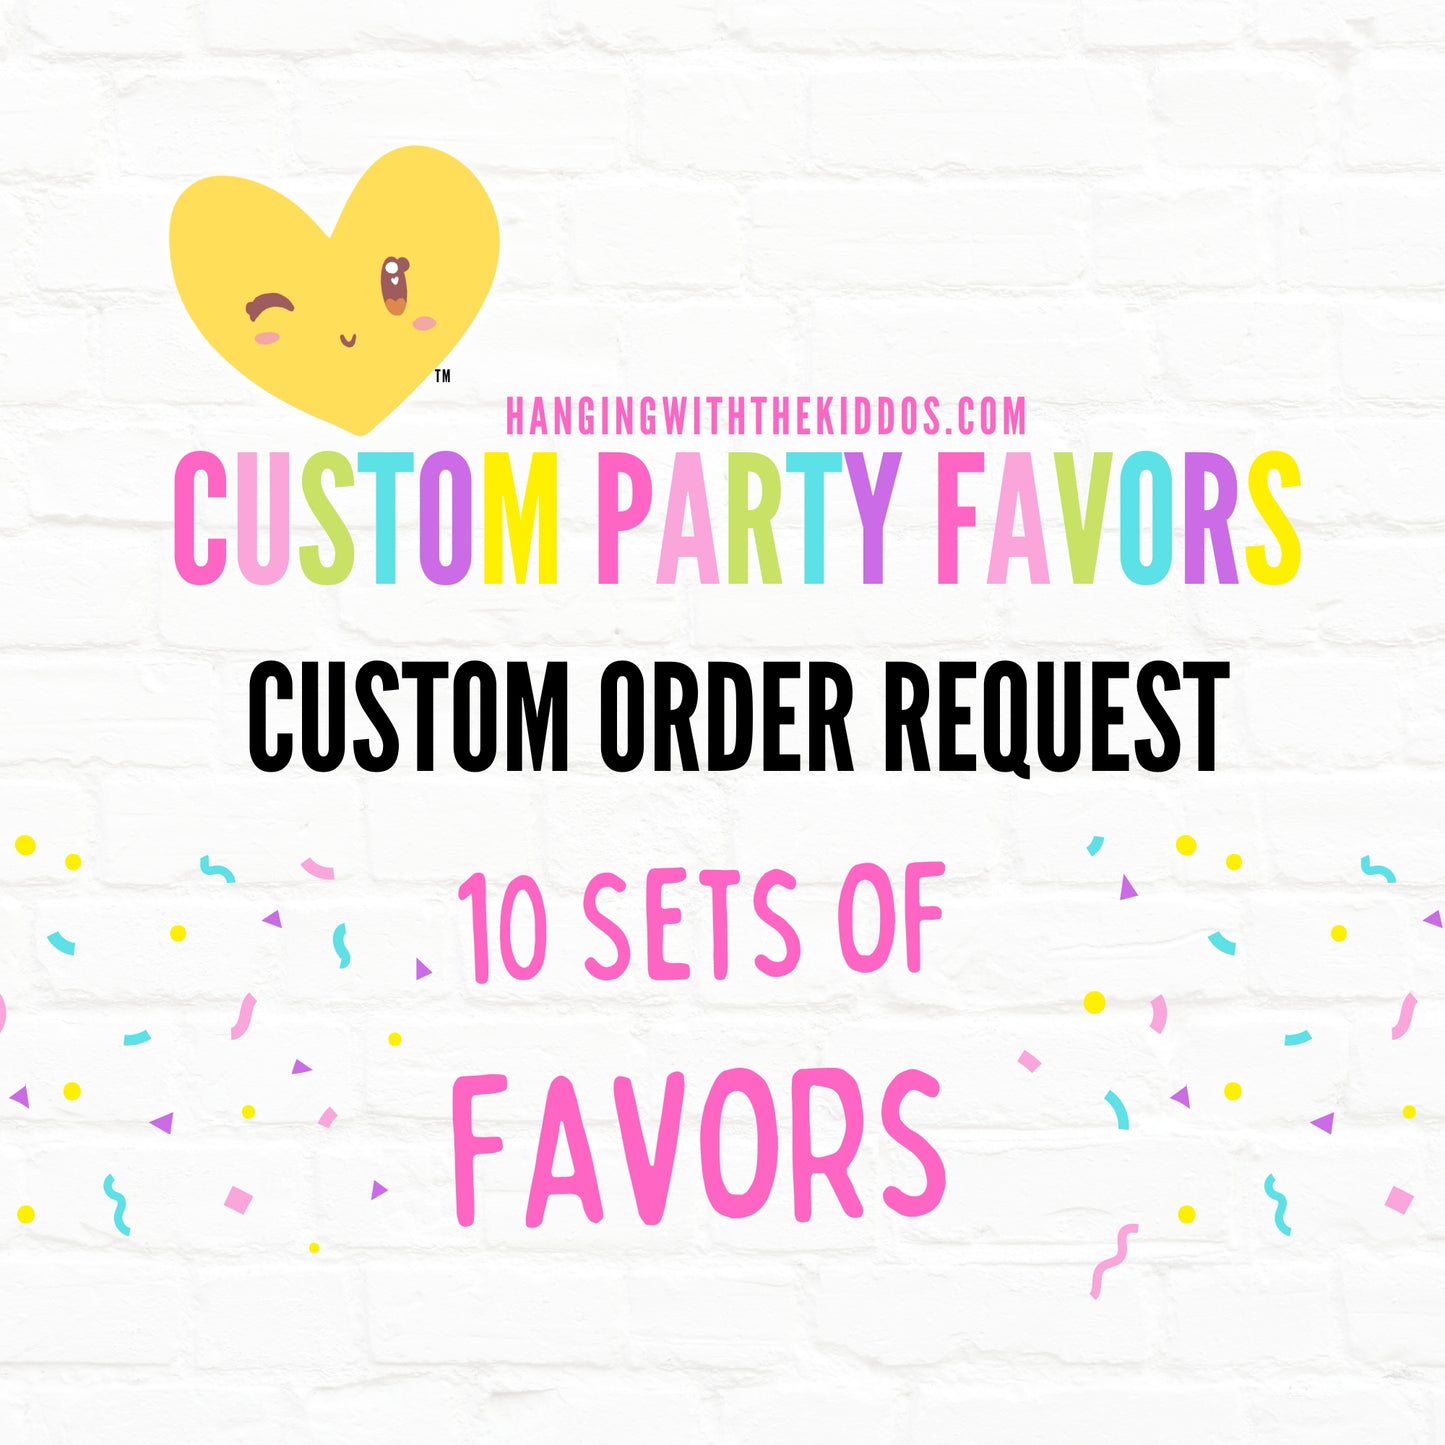 Custom Party Favors 10 Sets of Favors|Custom Order Request